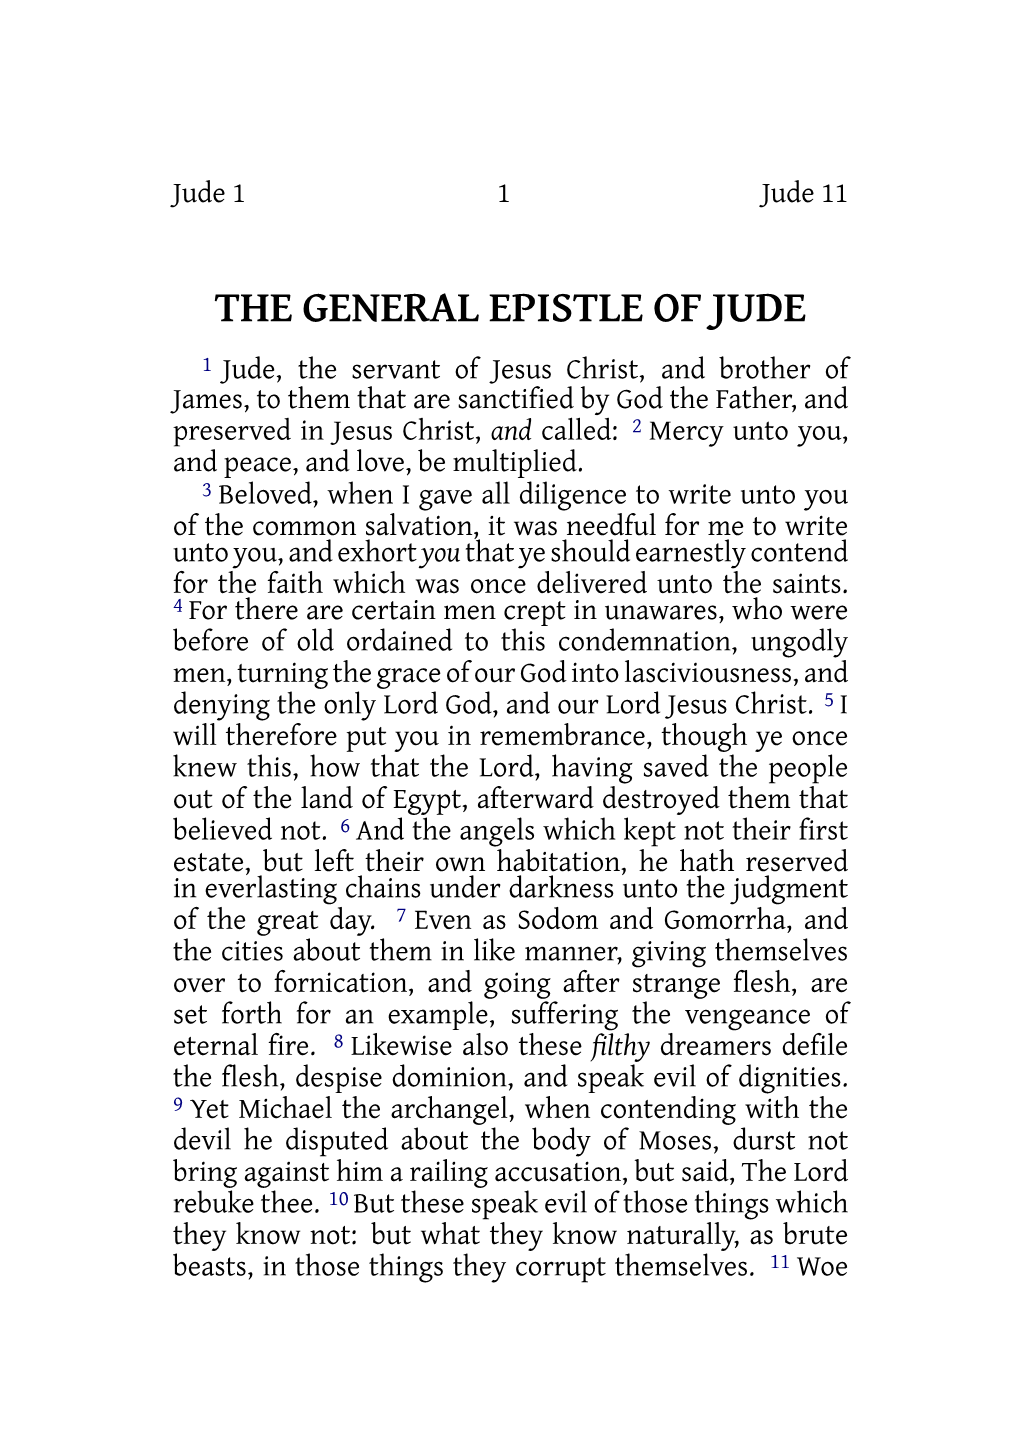 The General Epistle of Jude